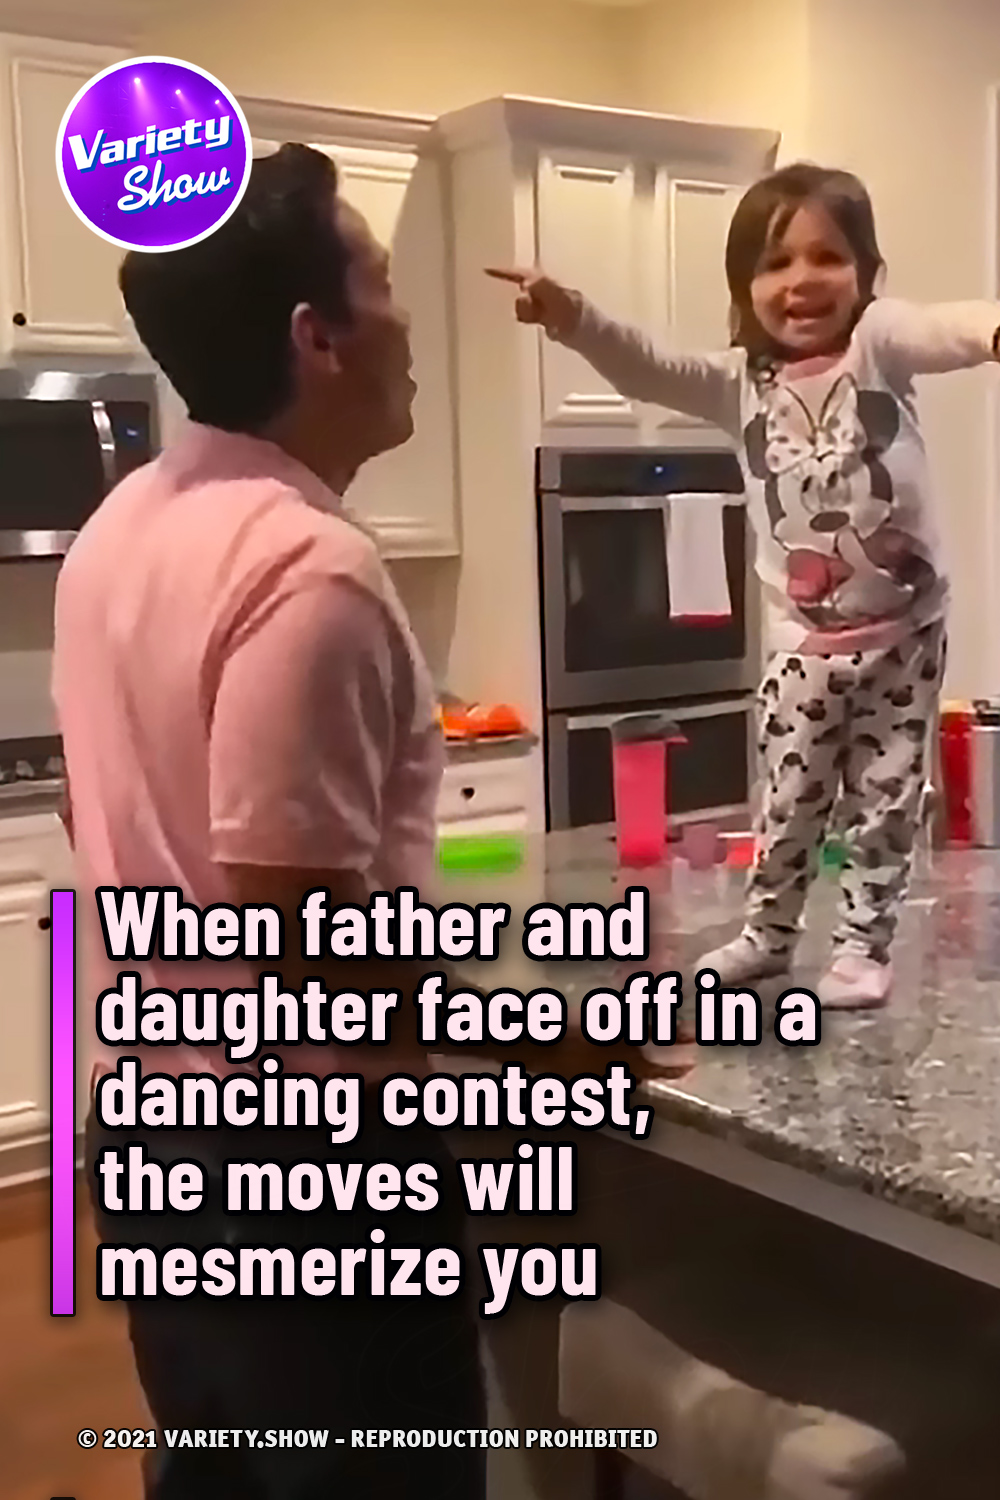 When father and daughter face off in a dancing contest, the moves will mesmerize you